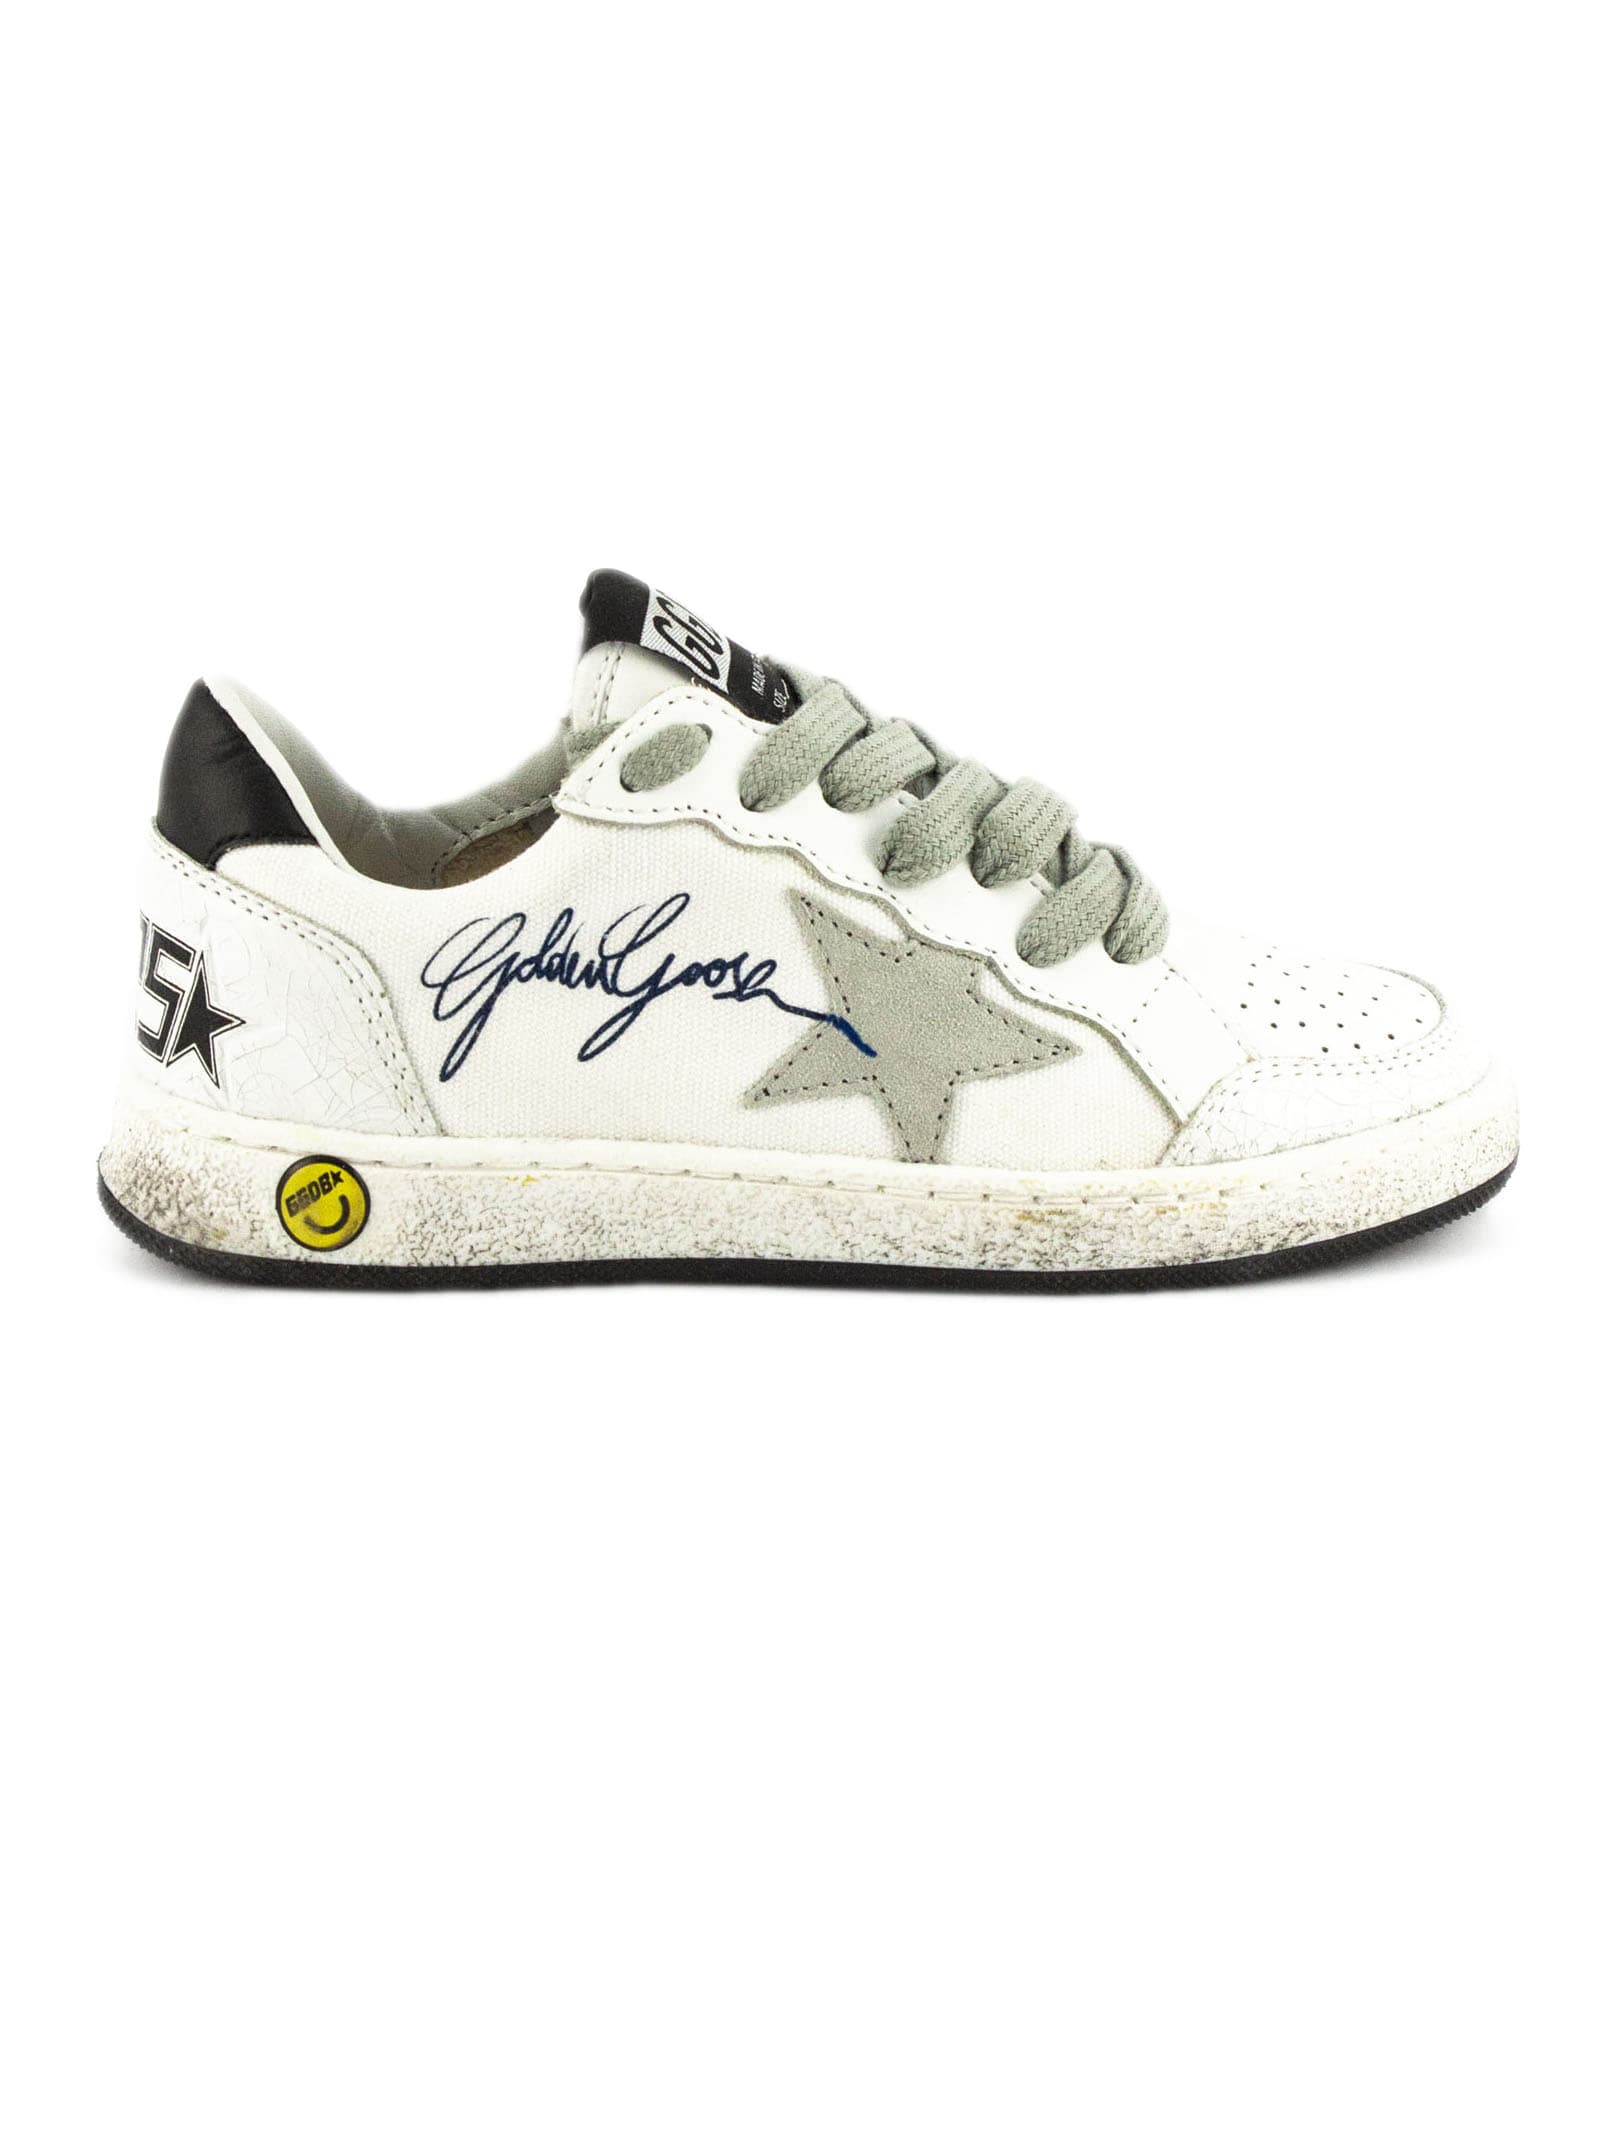 Golden Goose Ball Star White Leather And Cotton Sneaker